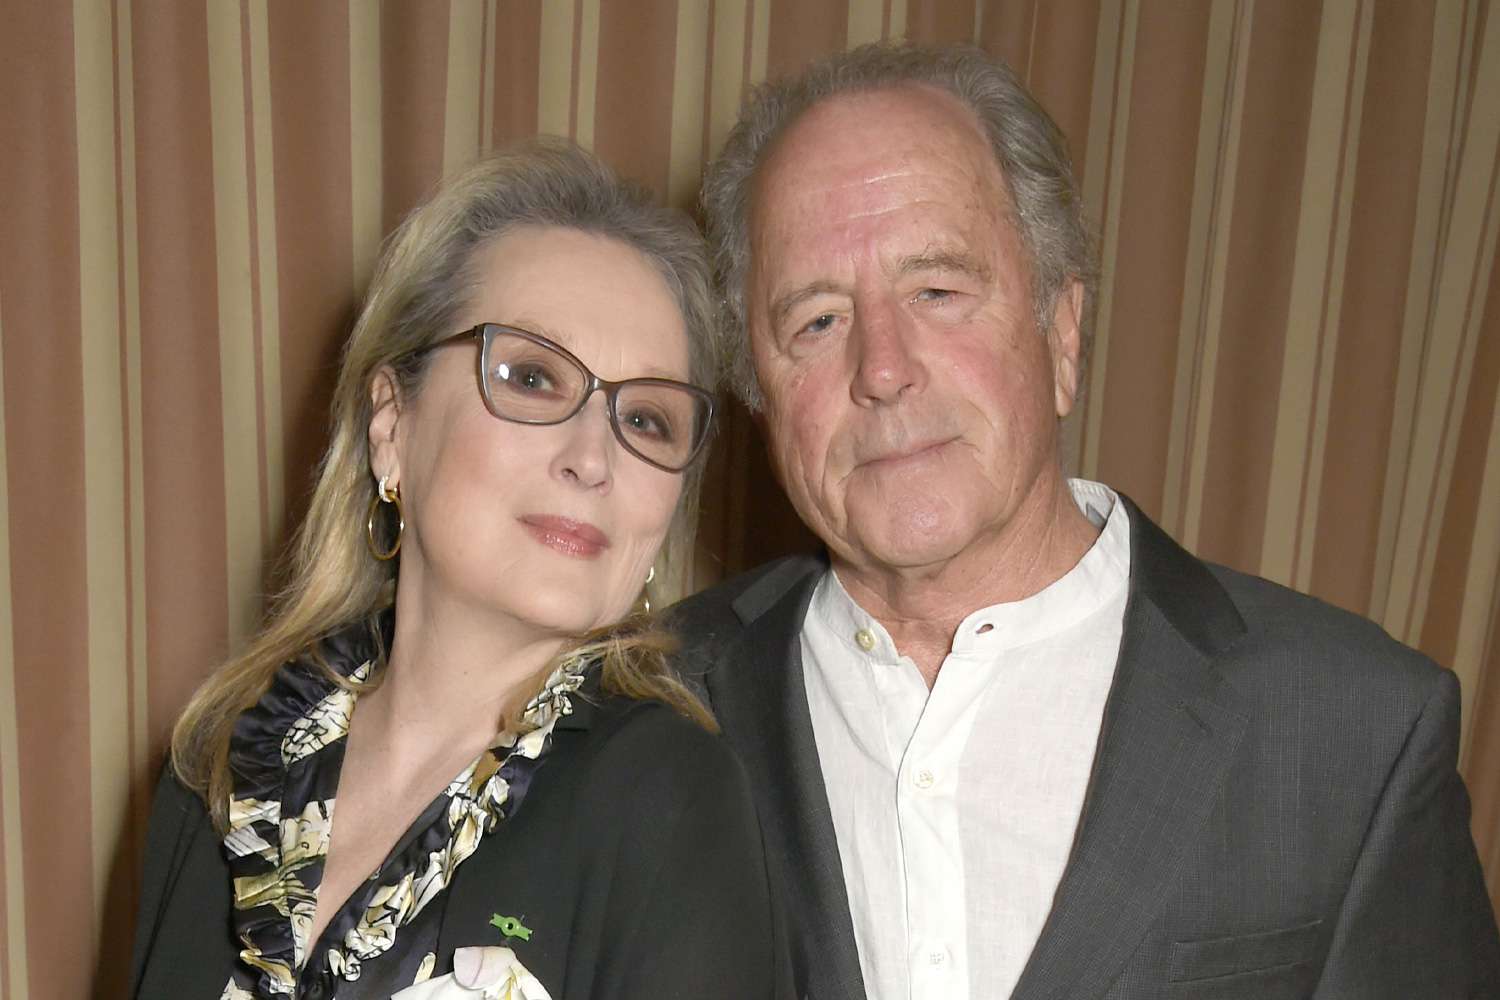 Meryl Streep's Shocking Marriage Update - Don Gummer Separates After 45 Years! 13